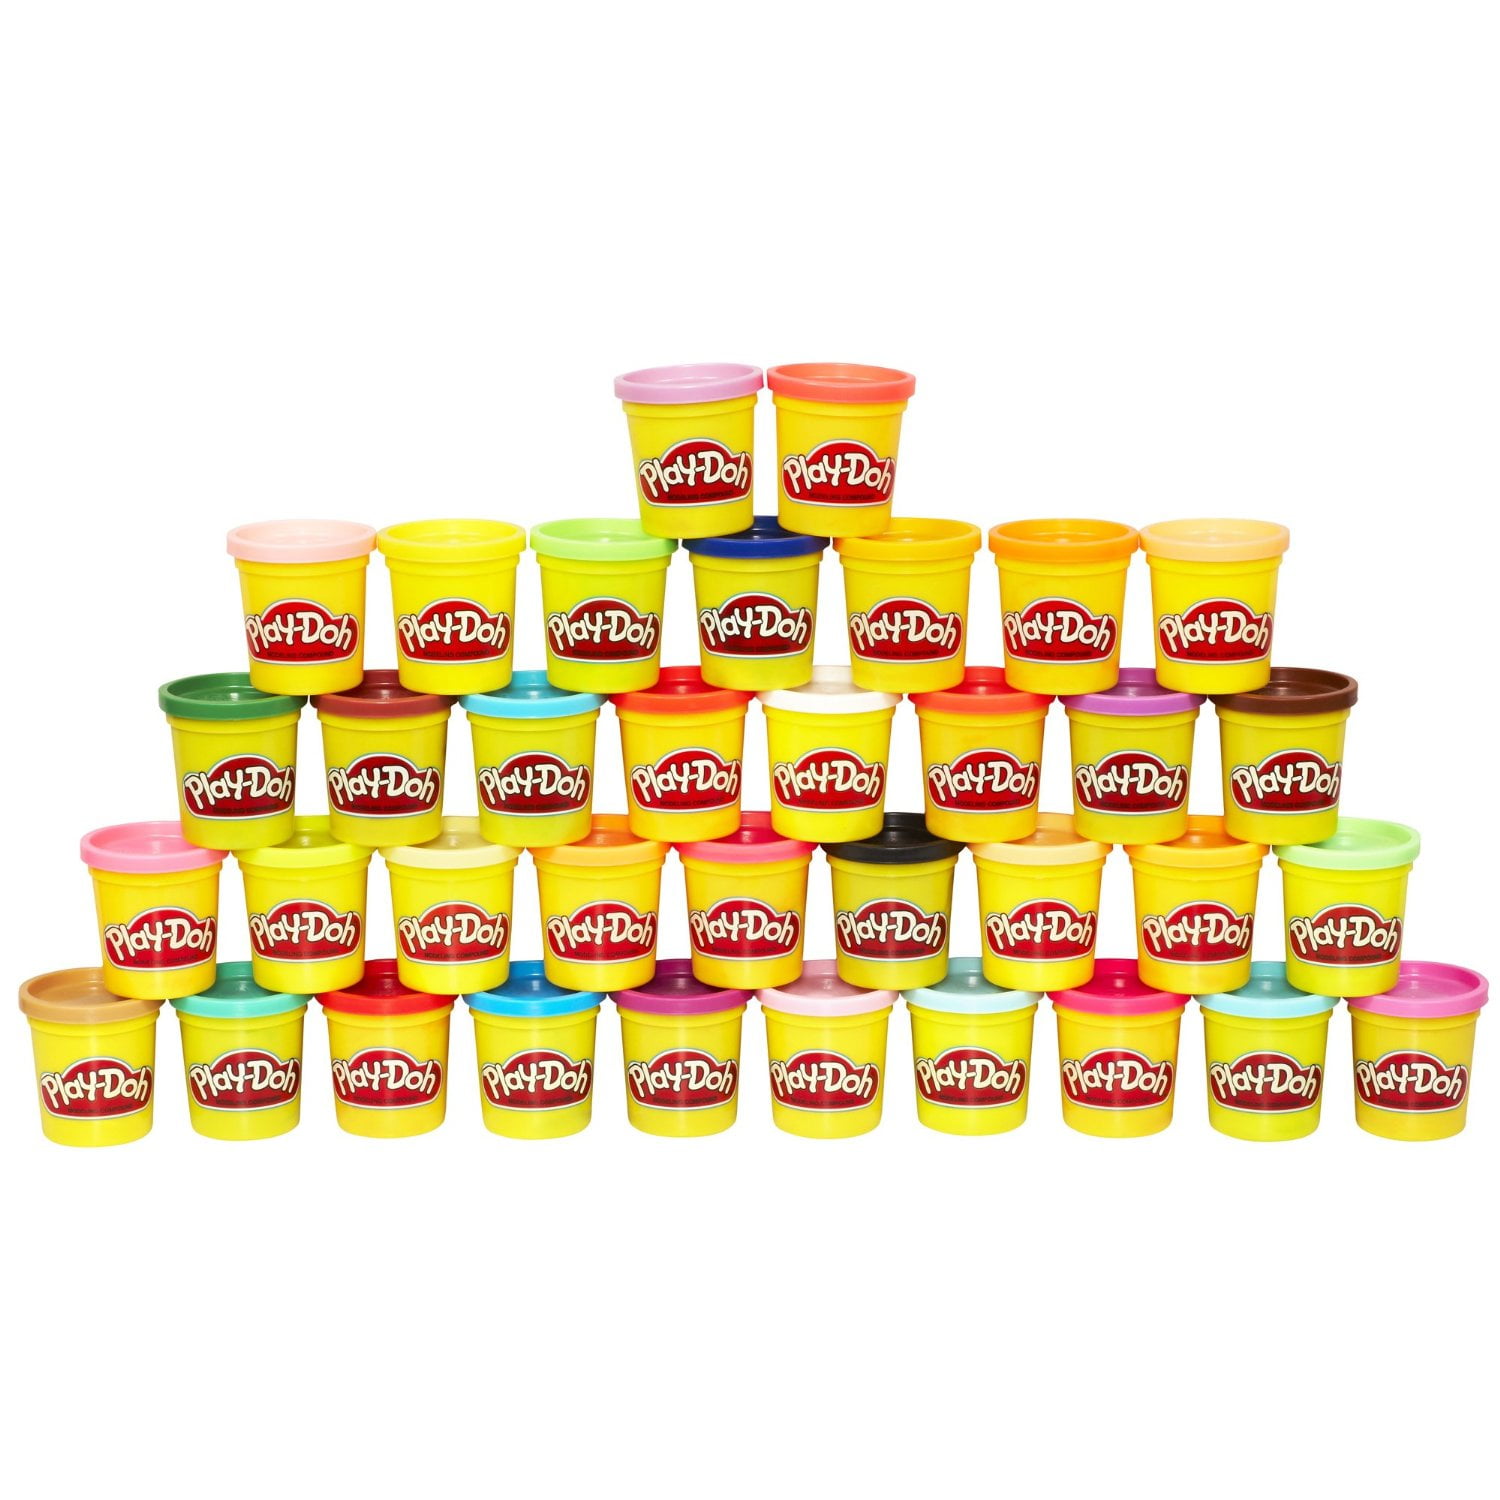 Play-Doh Modeling Compound 36 Pack Case of Colors, Non-Toxic